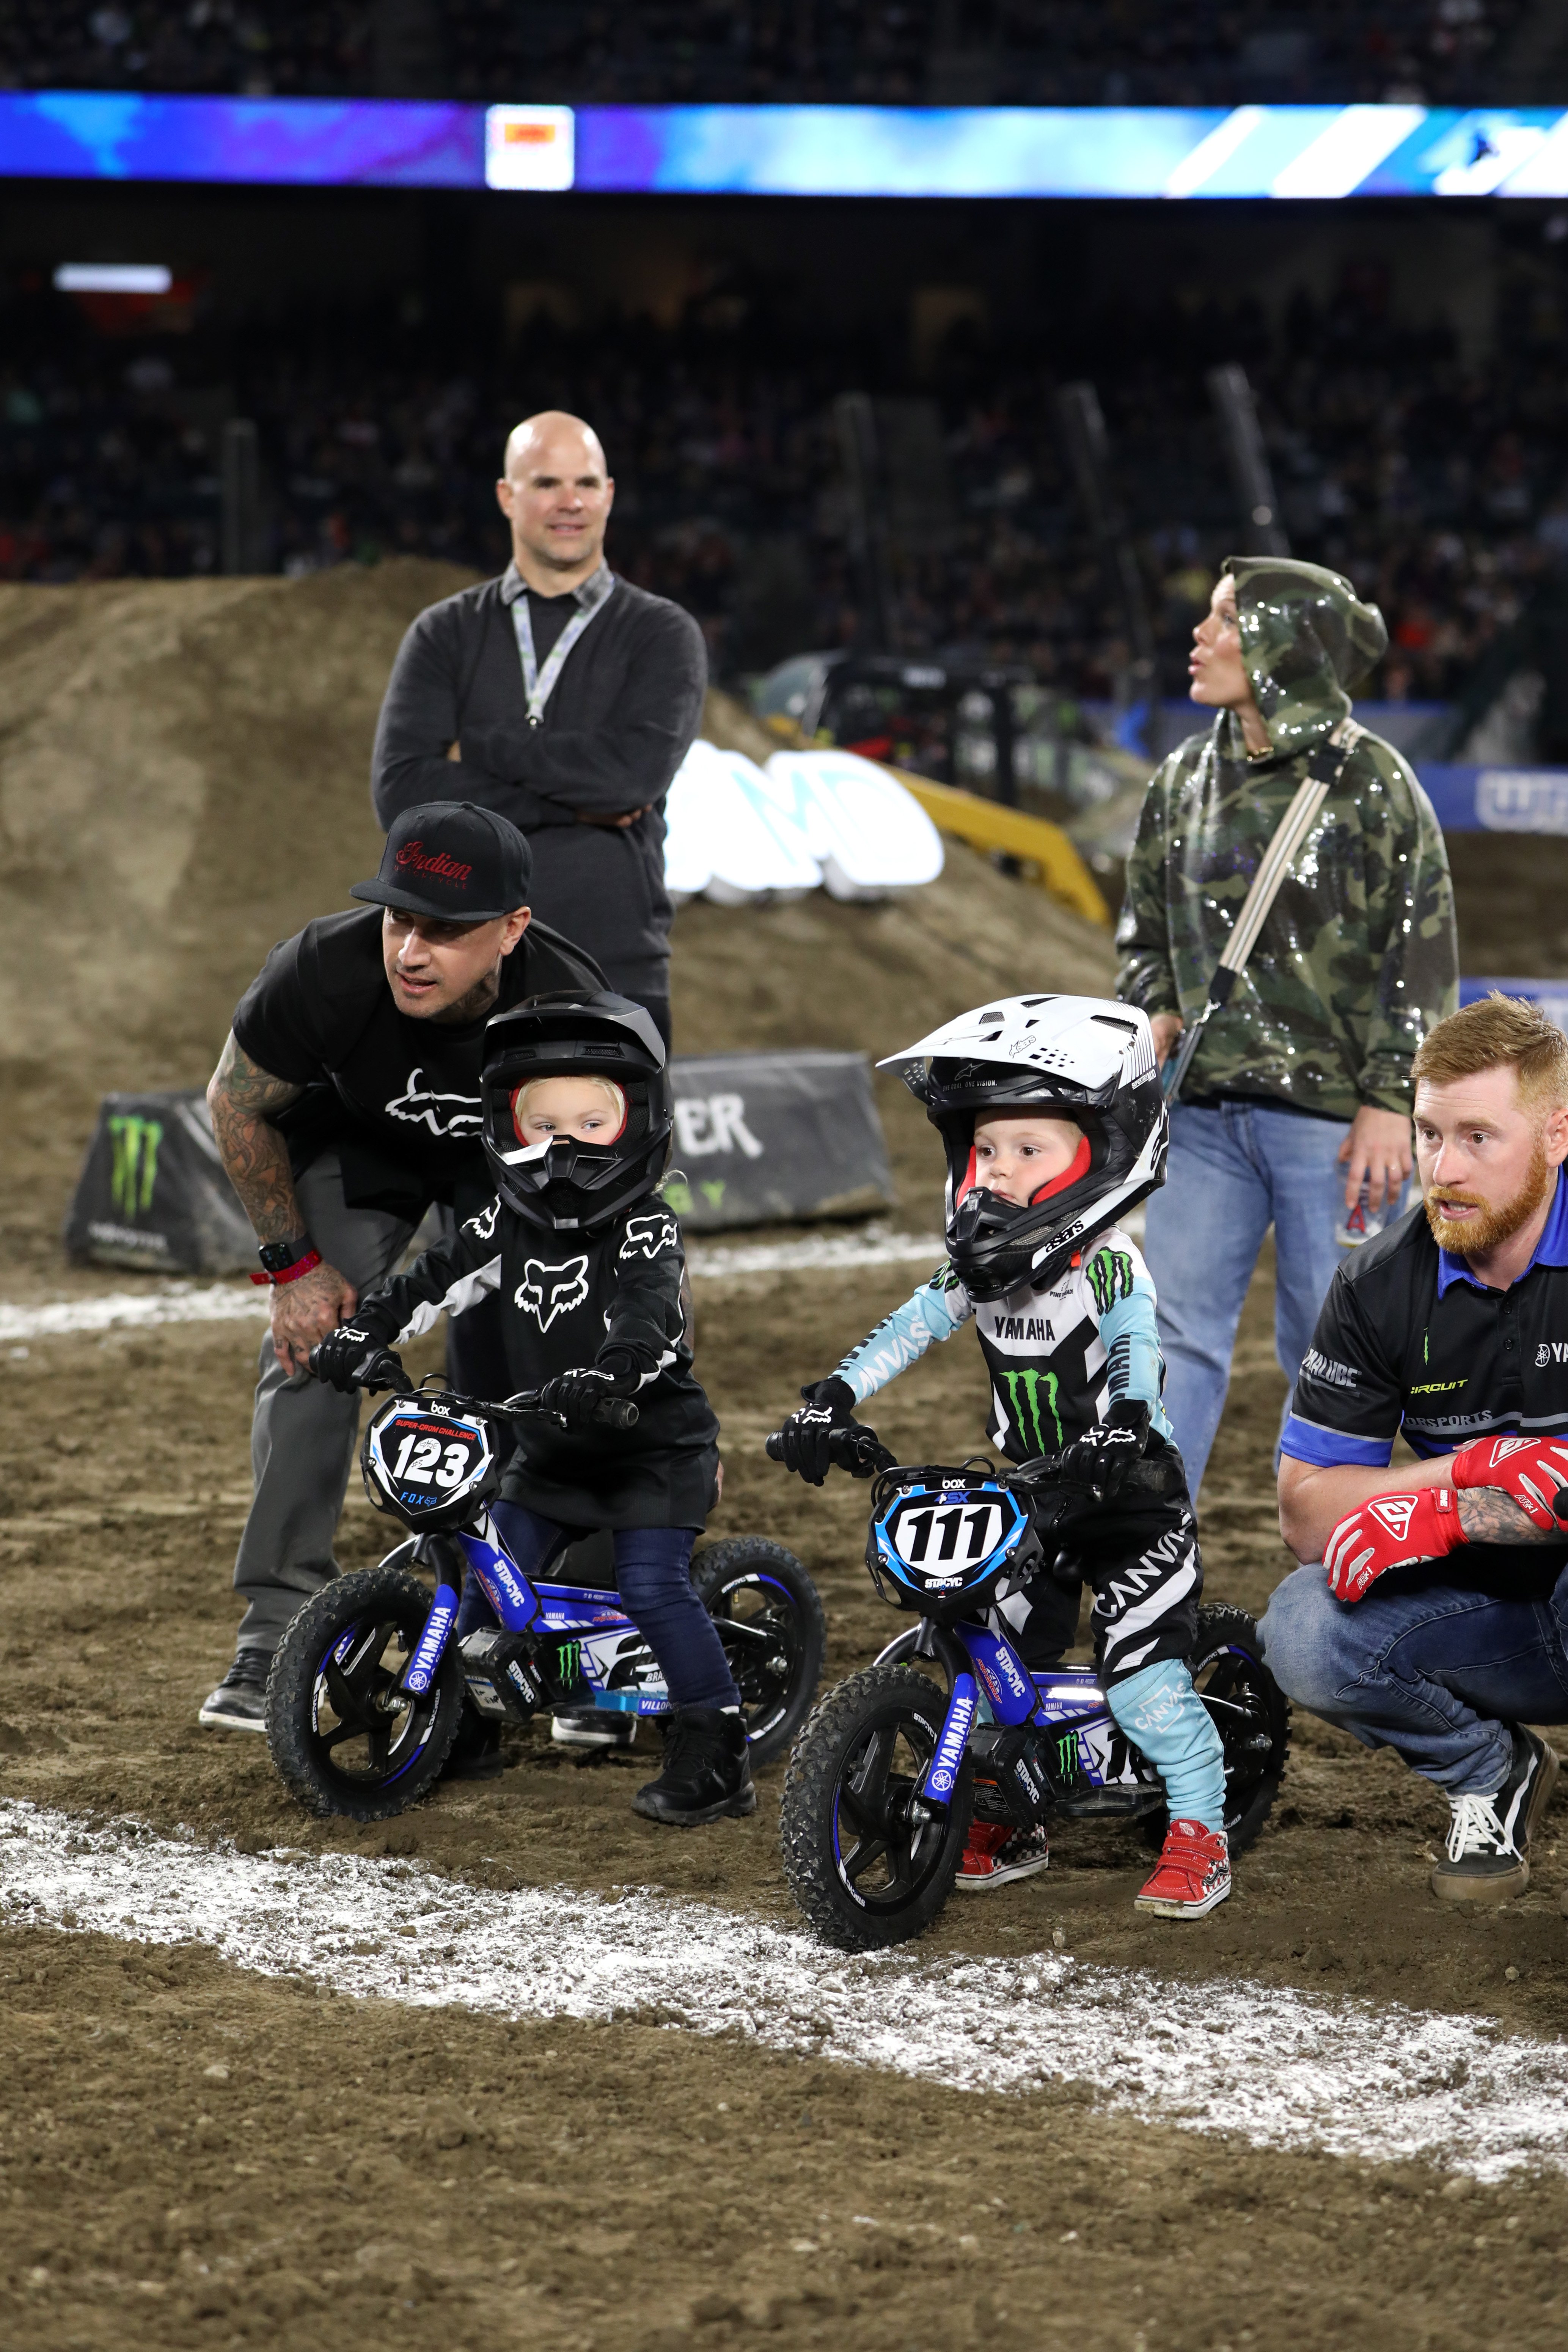 Carey Hart, Pink, and their son, Jameson, attend the Monster Energy Supercross VIP Event at Angel Stadium on January 18, 2020 in Anaheim, California. | Source: Getty Images